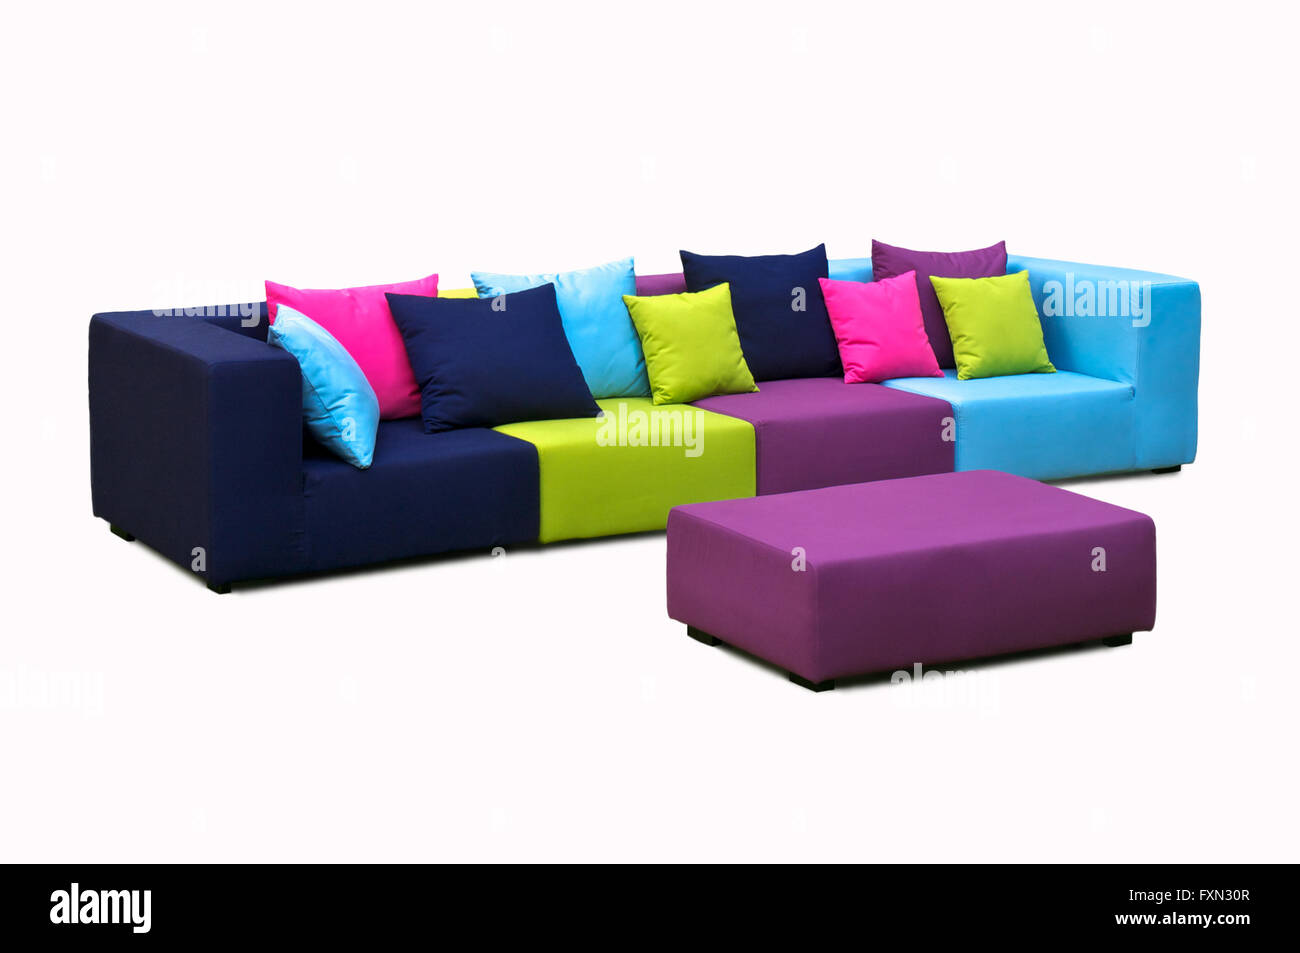 Outdoor indoor sofa with water resistant pillows Stock Photo